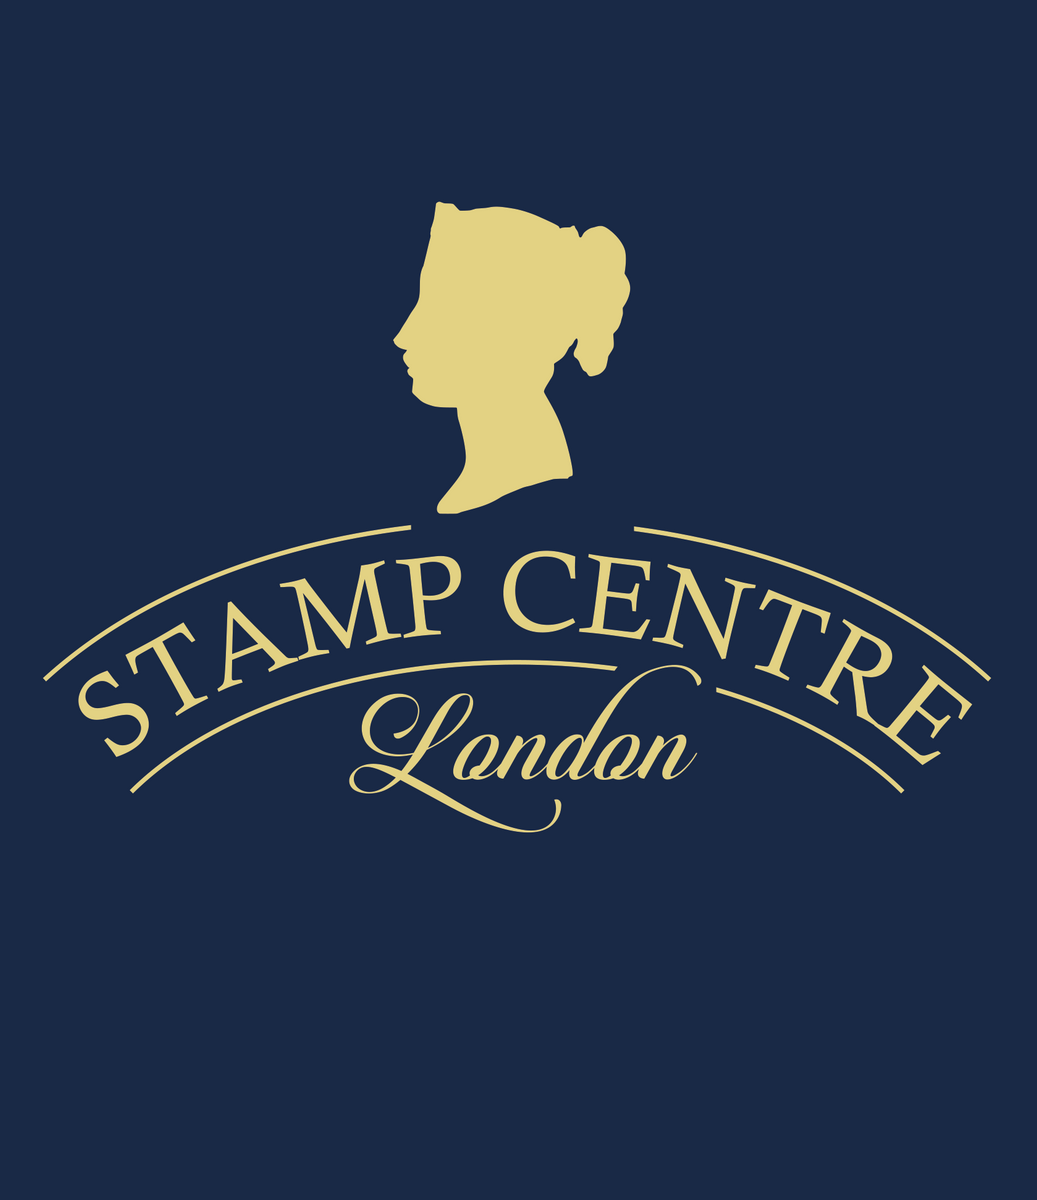 The Stamp Centre London